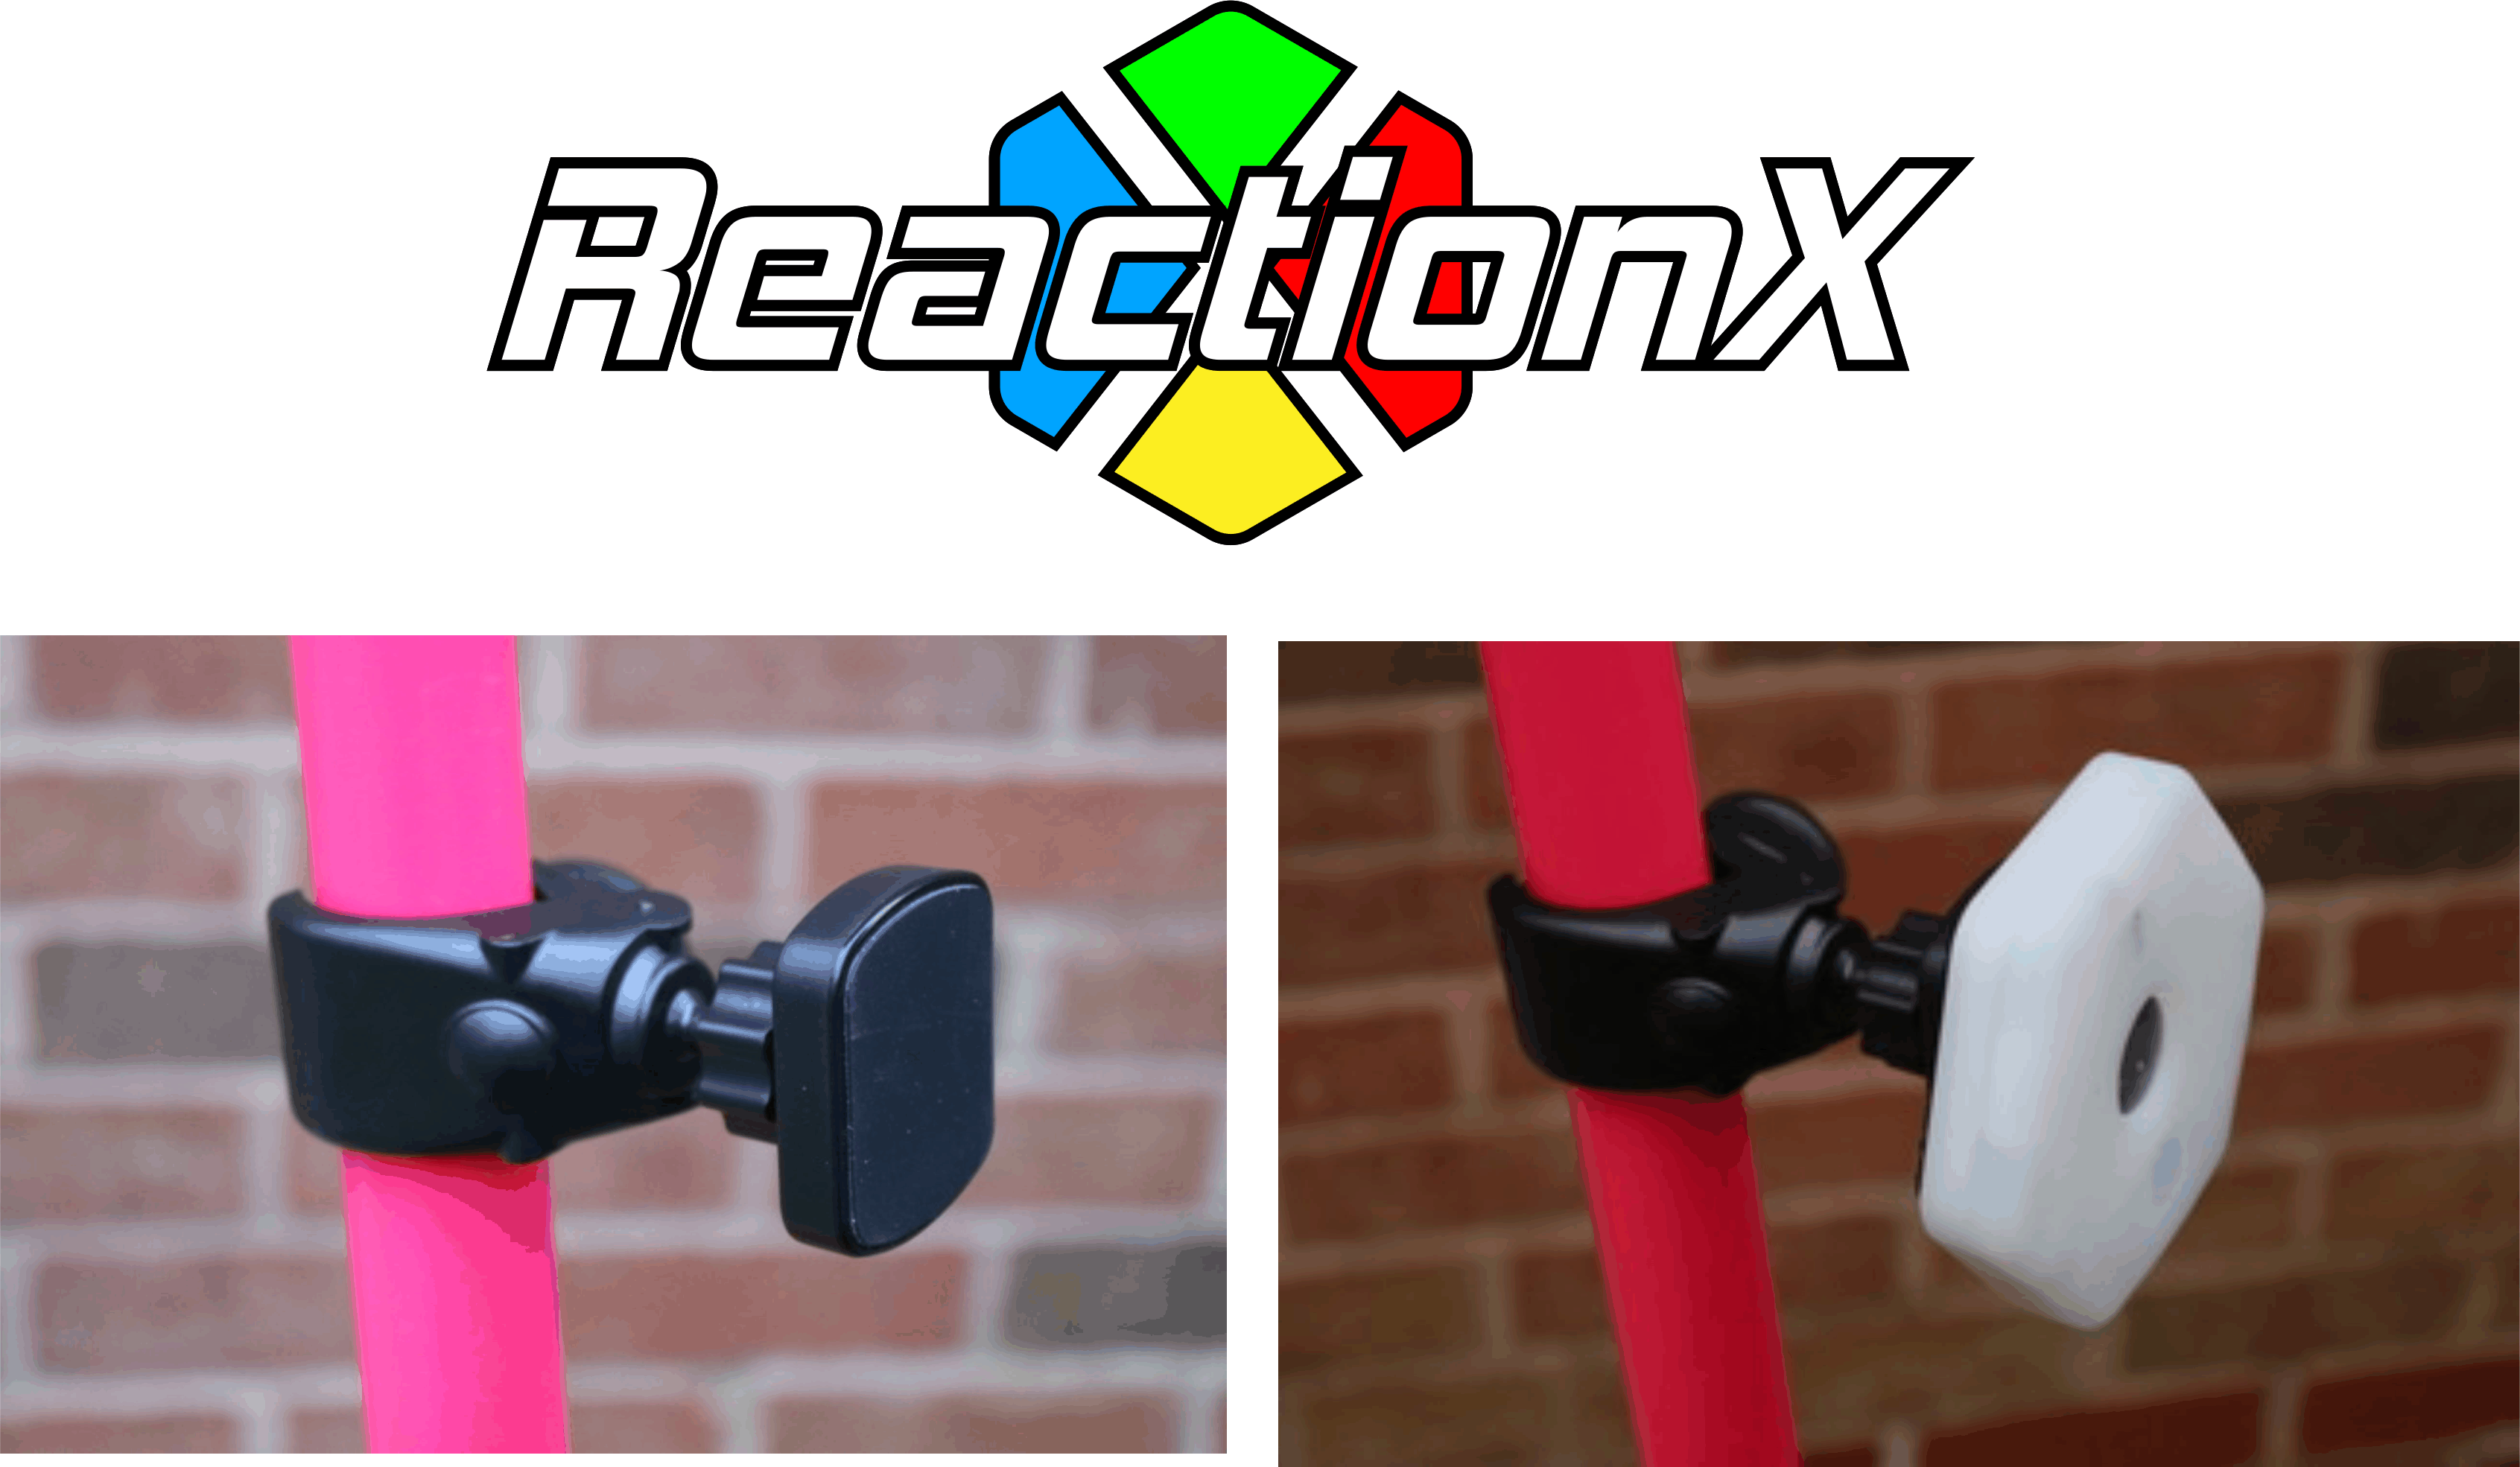 Reaction X - 6 Pole clamps with magnets.